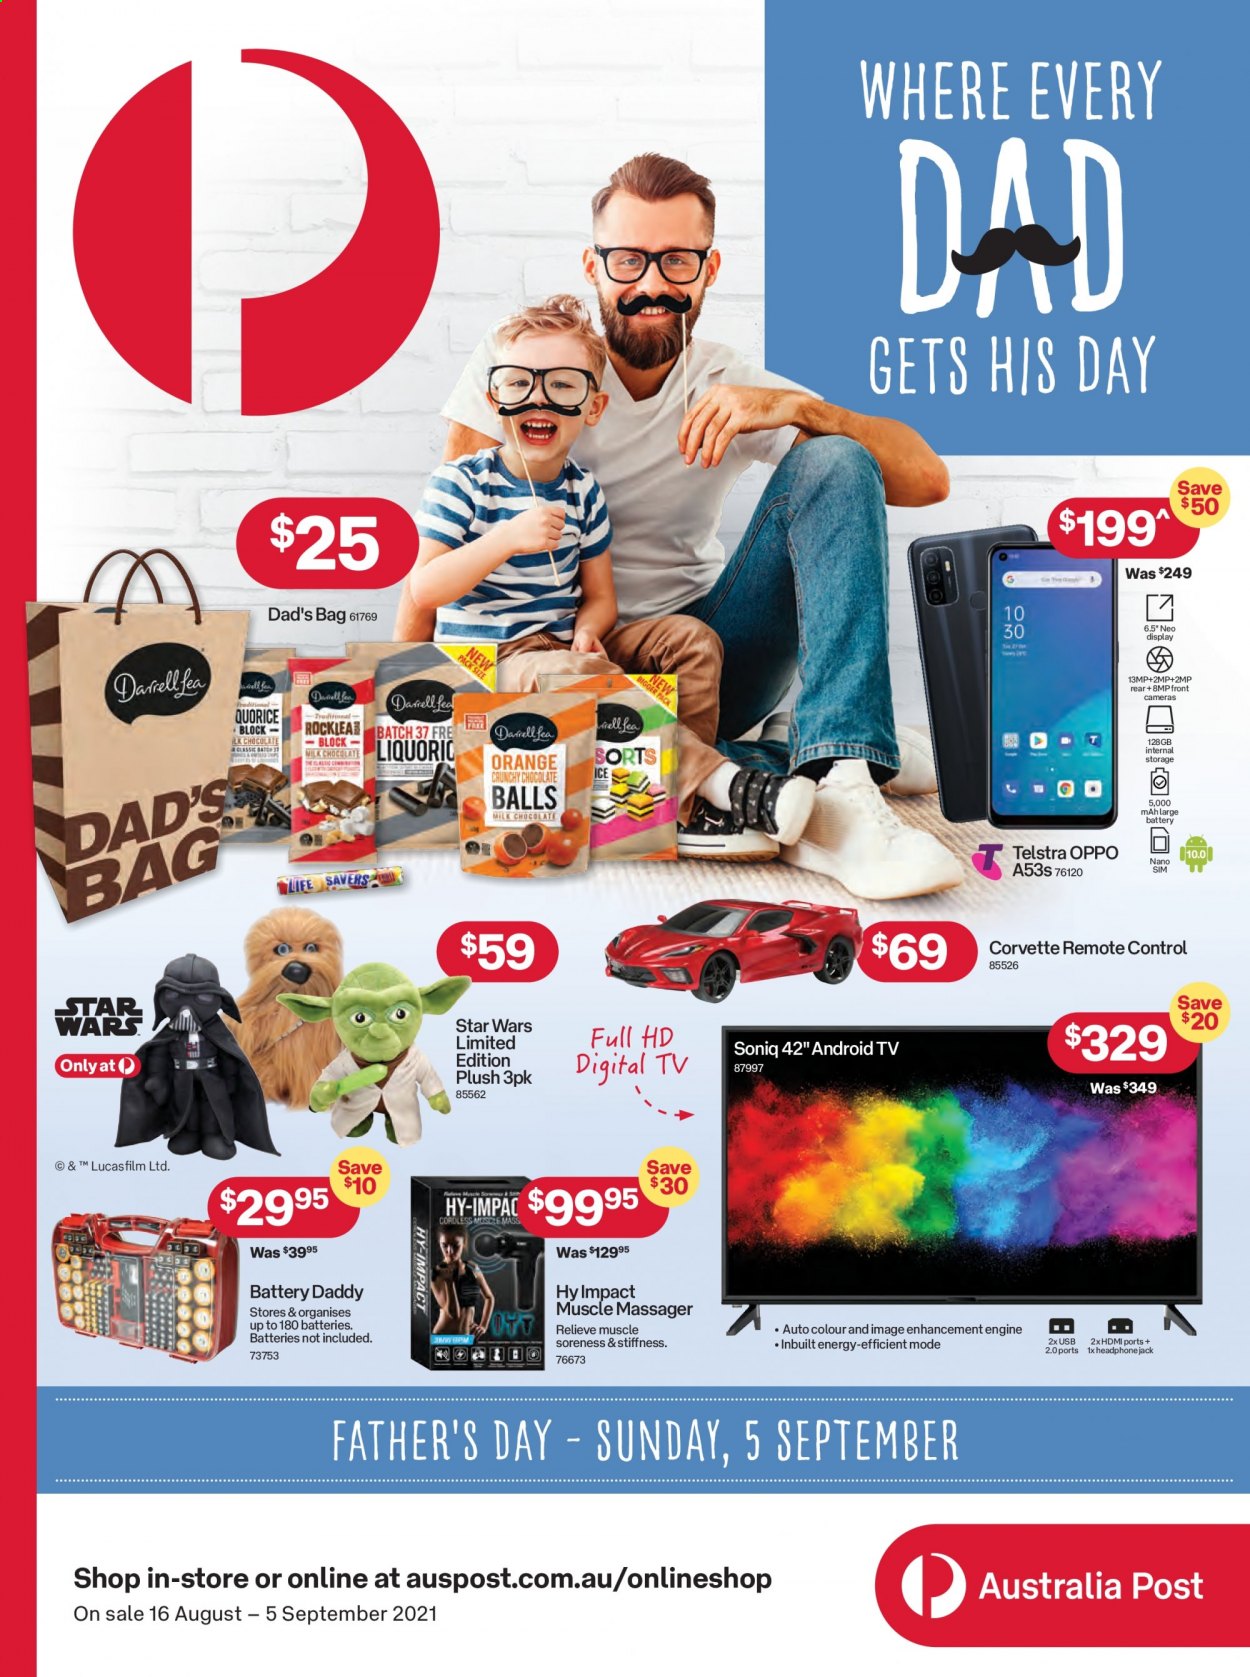 thumbnail - Australia Post Catalogue - 16 Aug 2021 - 5 Sep 2021 - Sales products - bag, Oppo, camera, Android TV, TV, headphones, remote control, massager. Page 1.